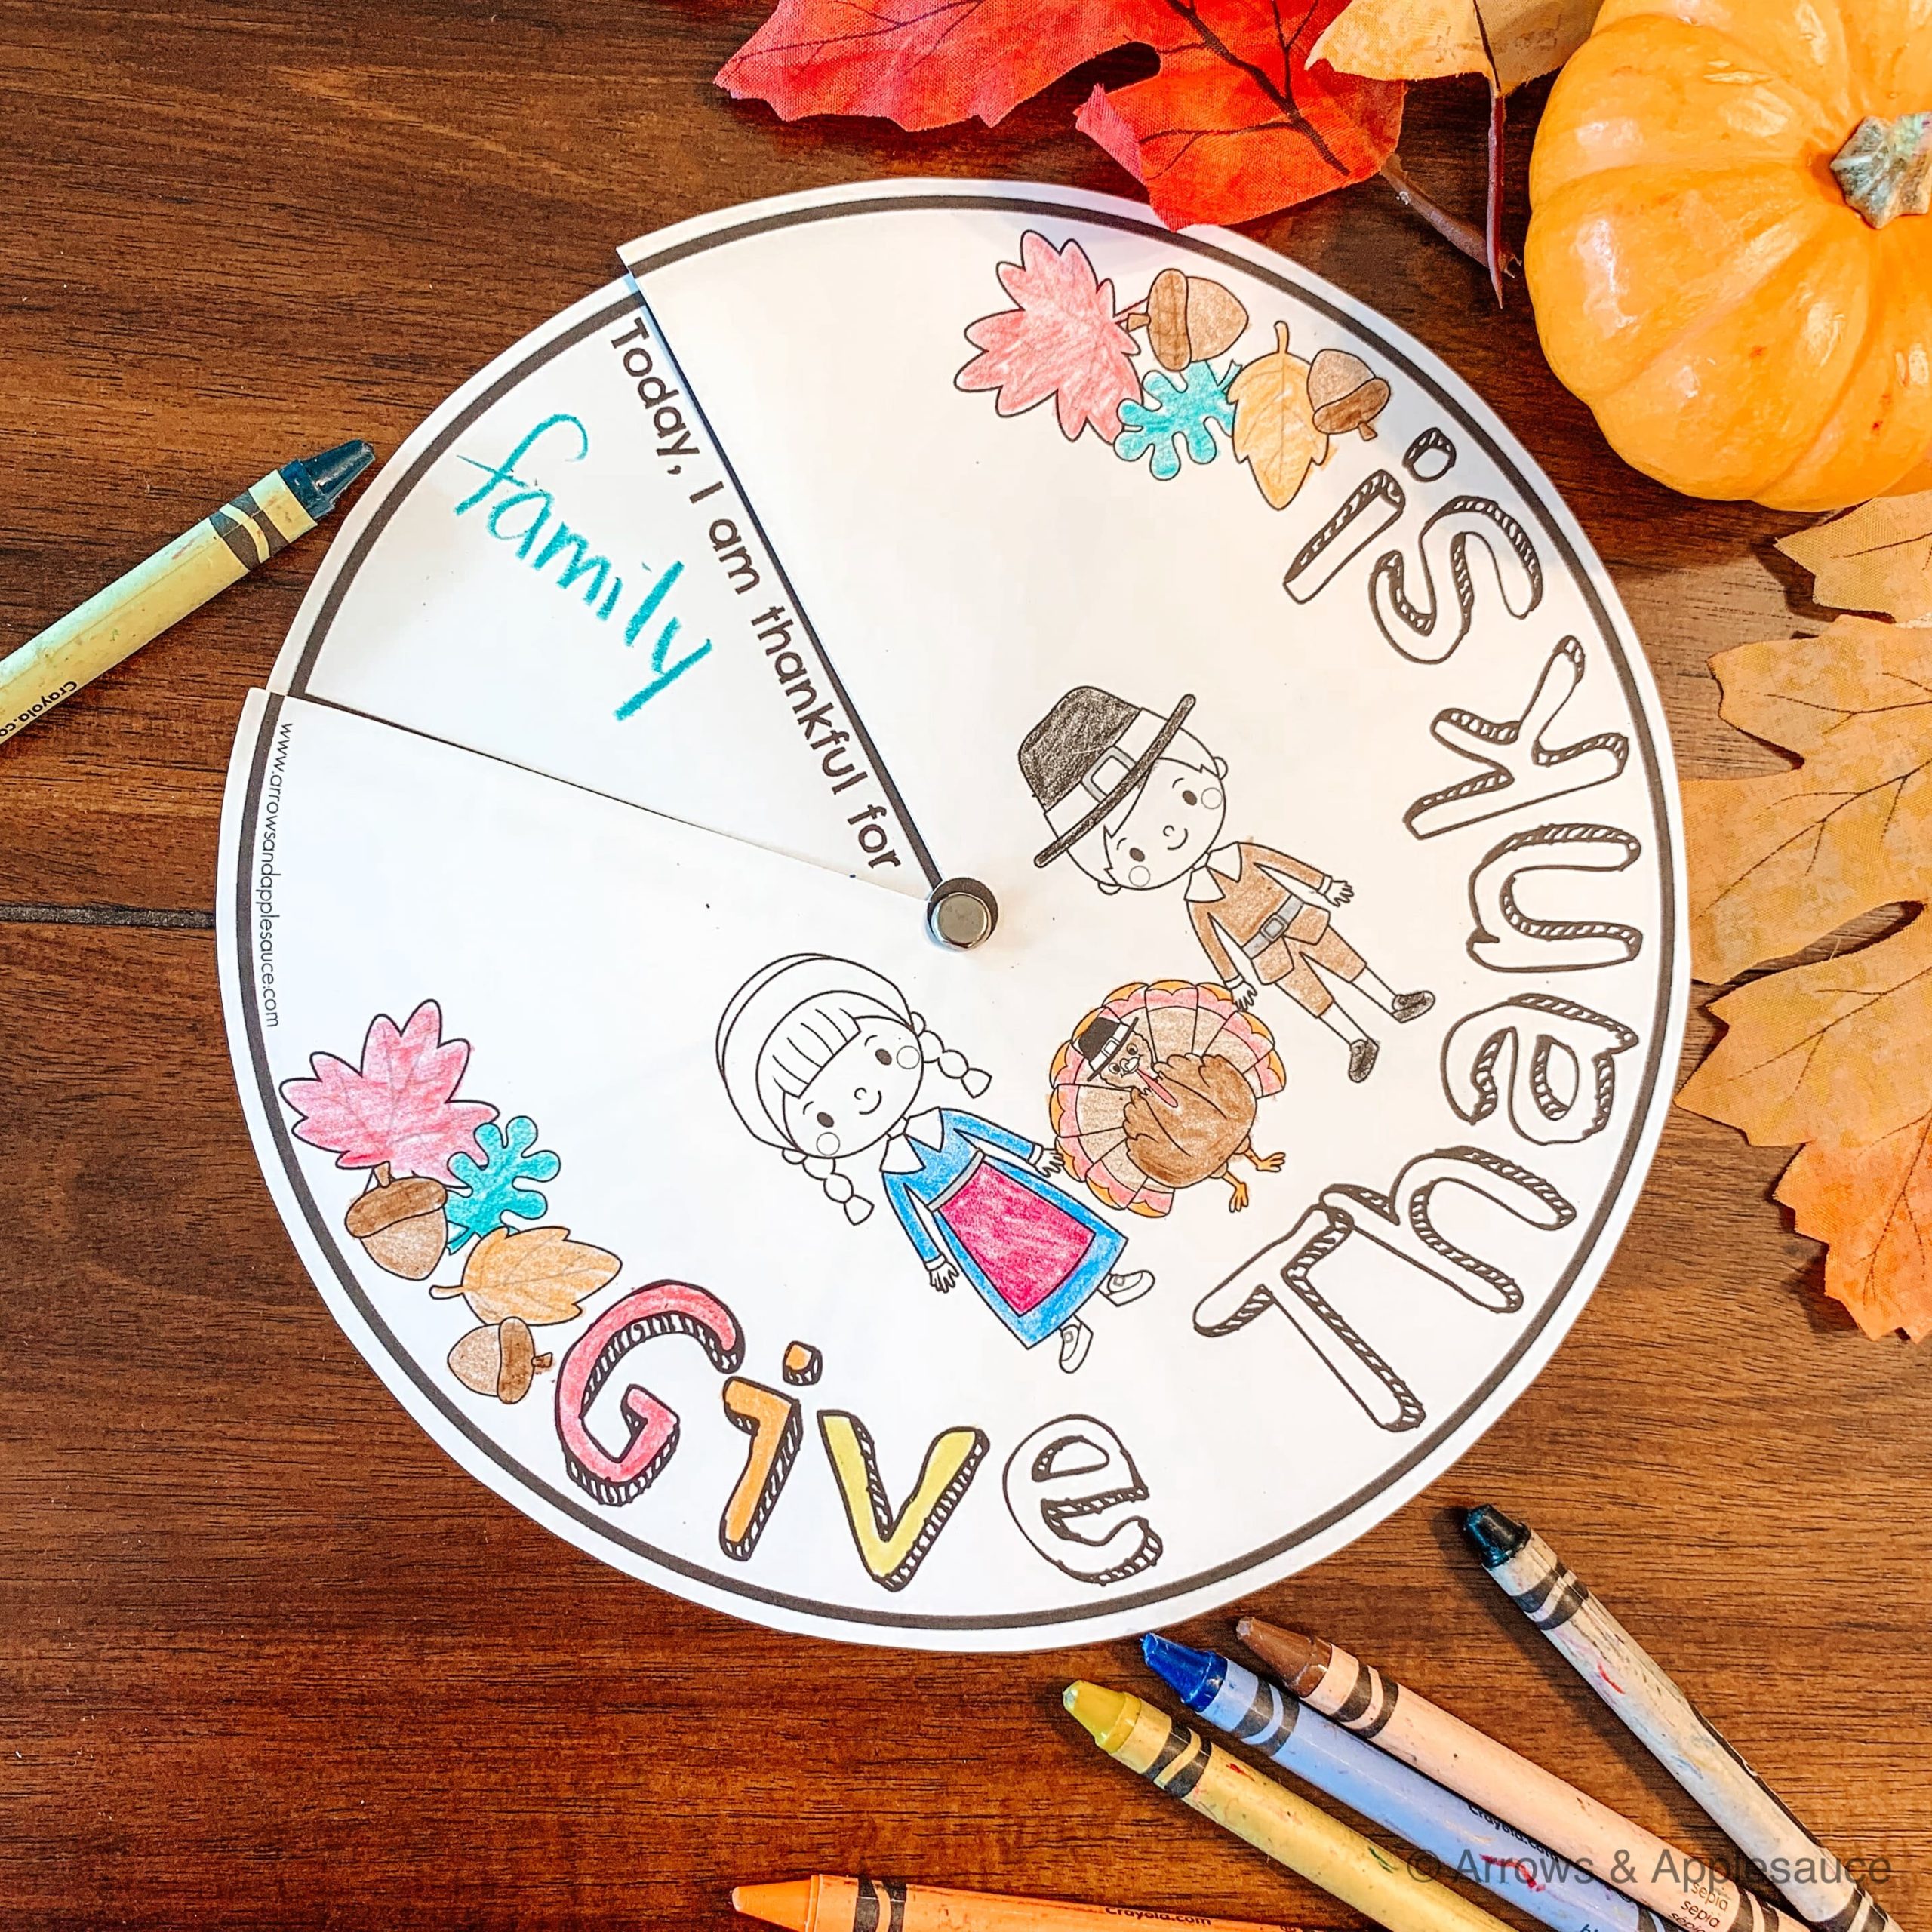 Raising thankful kids is a year-round job, but we're making it a family focus this holiday season by adding some fun and simple helpful traditions. #Thanksgivingprintables #Thanksgivingkidsactivities #Thanksgivingcoloring #Thankfulactivity #thankfulkids #grateful #Christianparenting #christiankids #freekidsprintables #Homeschoolactivities #preschoolprintables #homeschoolkindergarten